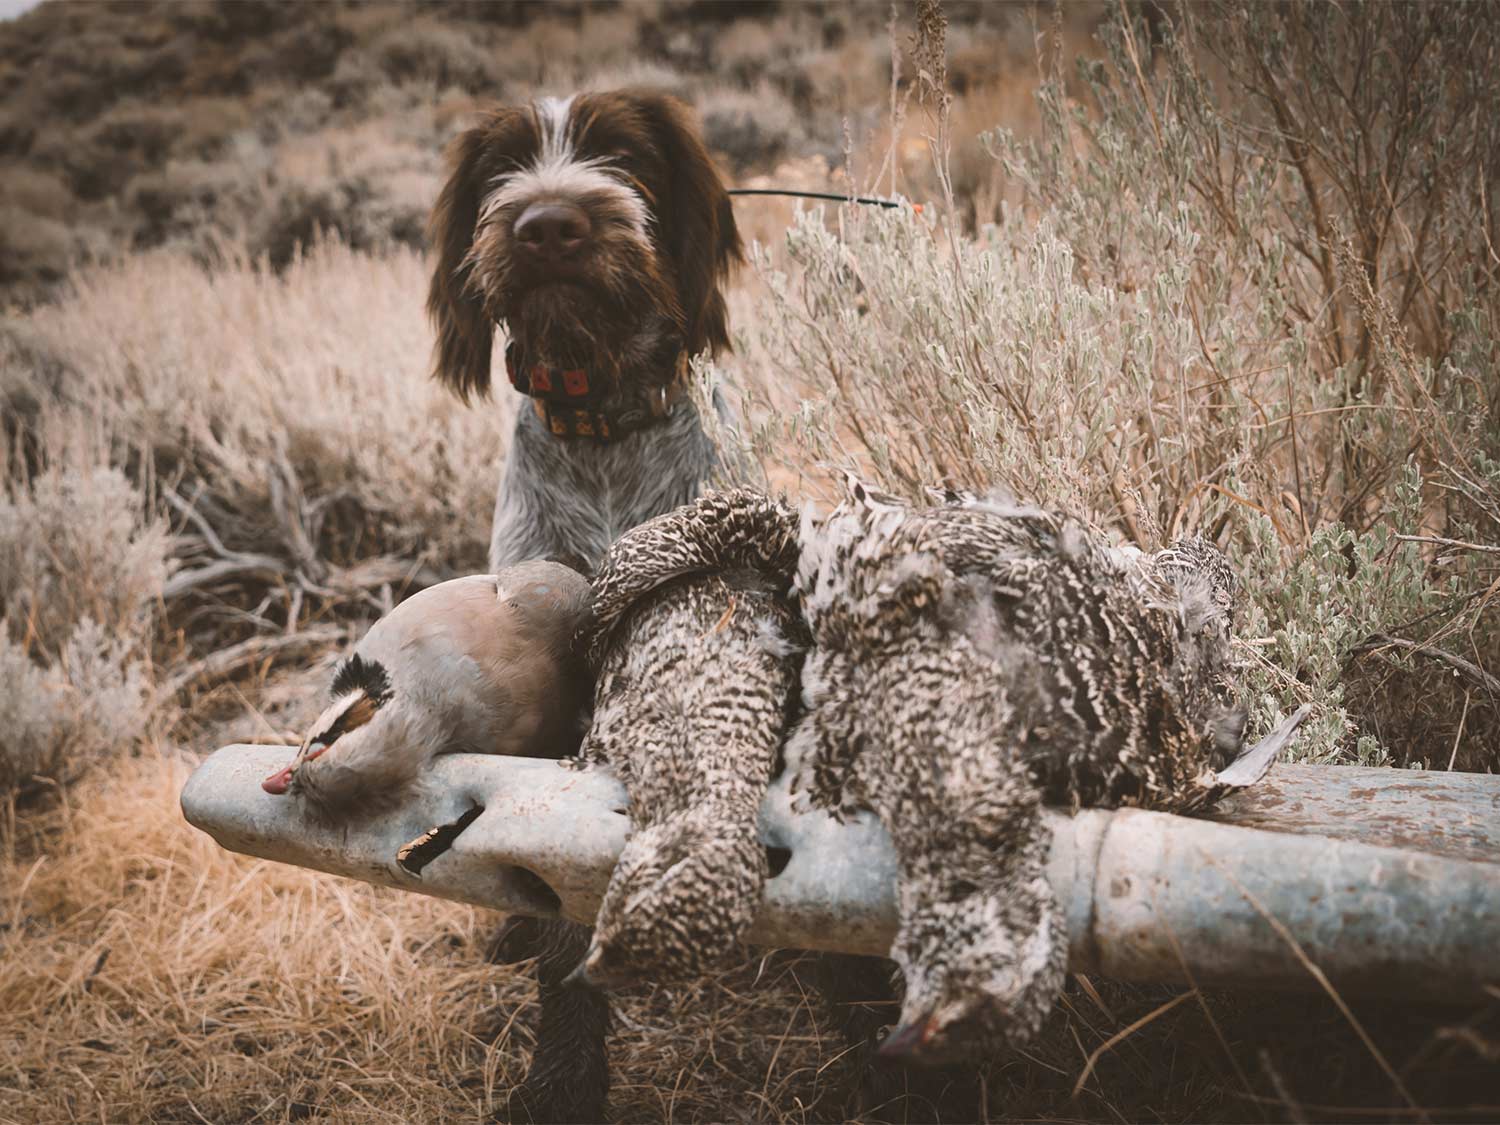 A hunting dog stands beside a limit of chukar and sage grouse birds.